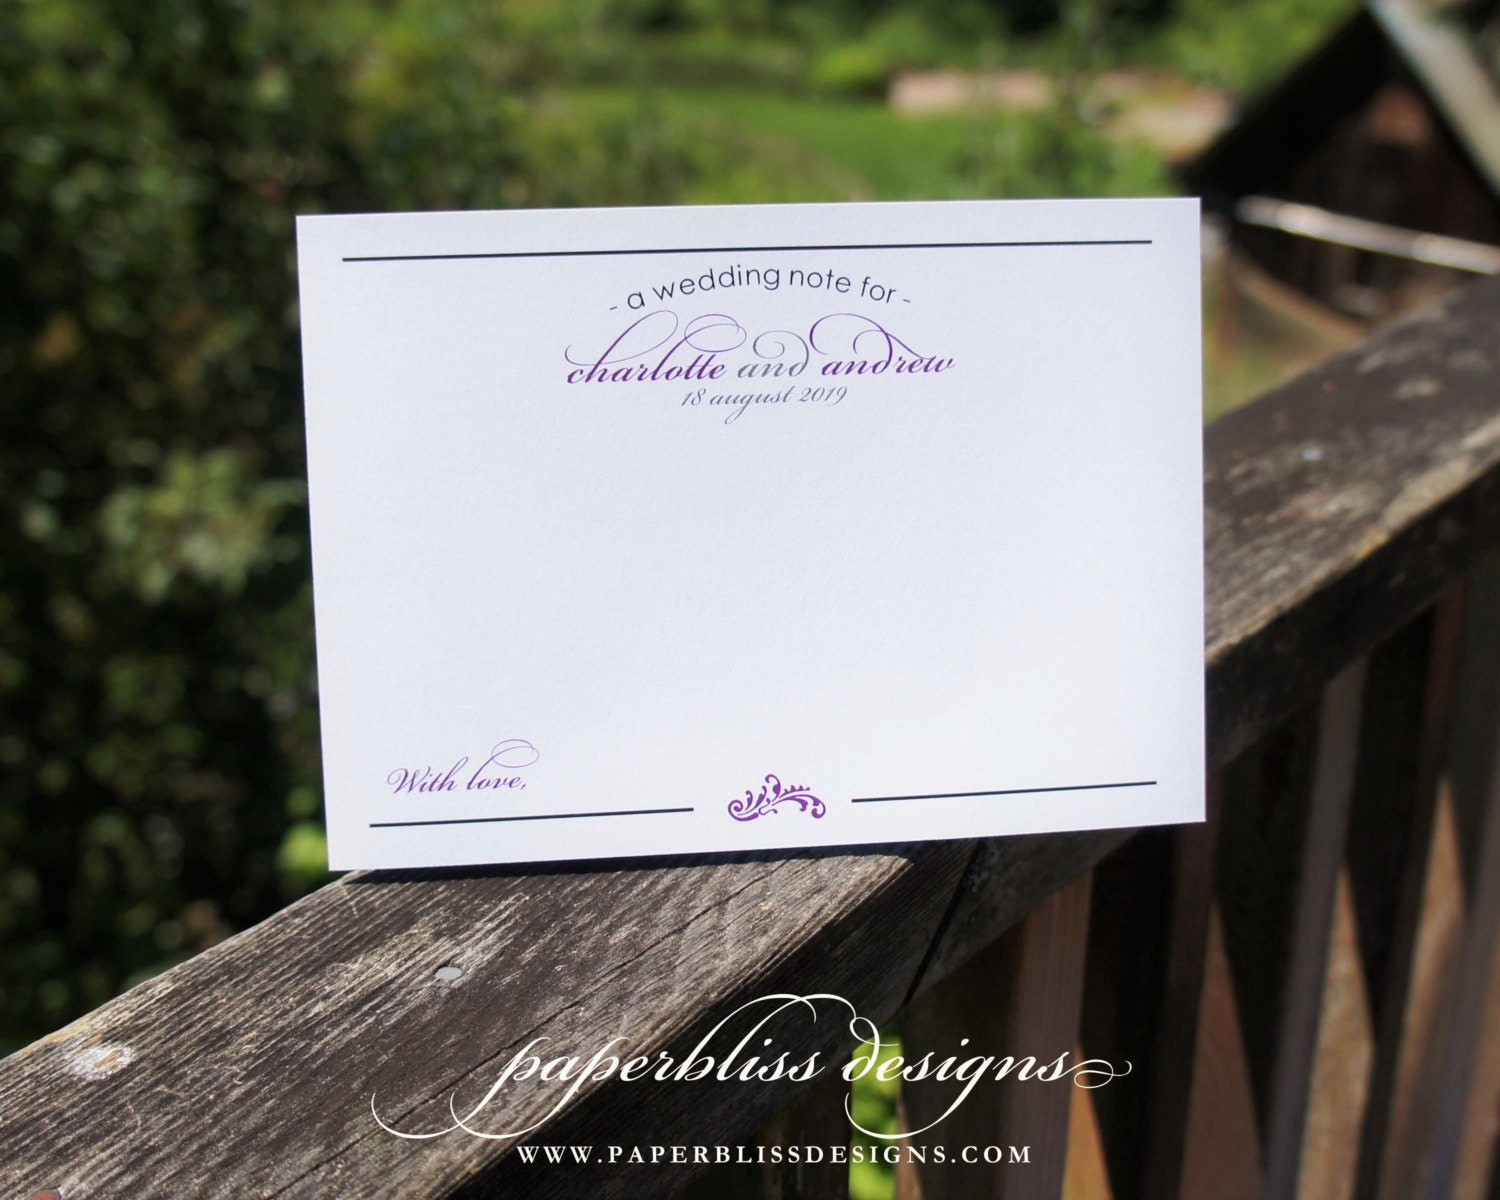 Custom Wedding Wishes Cards Wedding messages for the bride